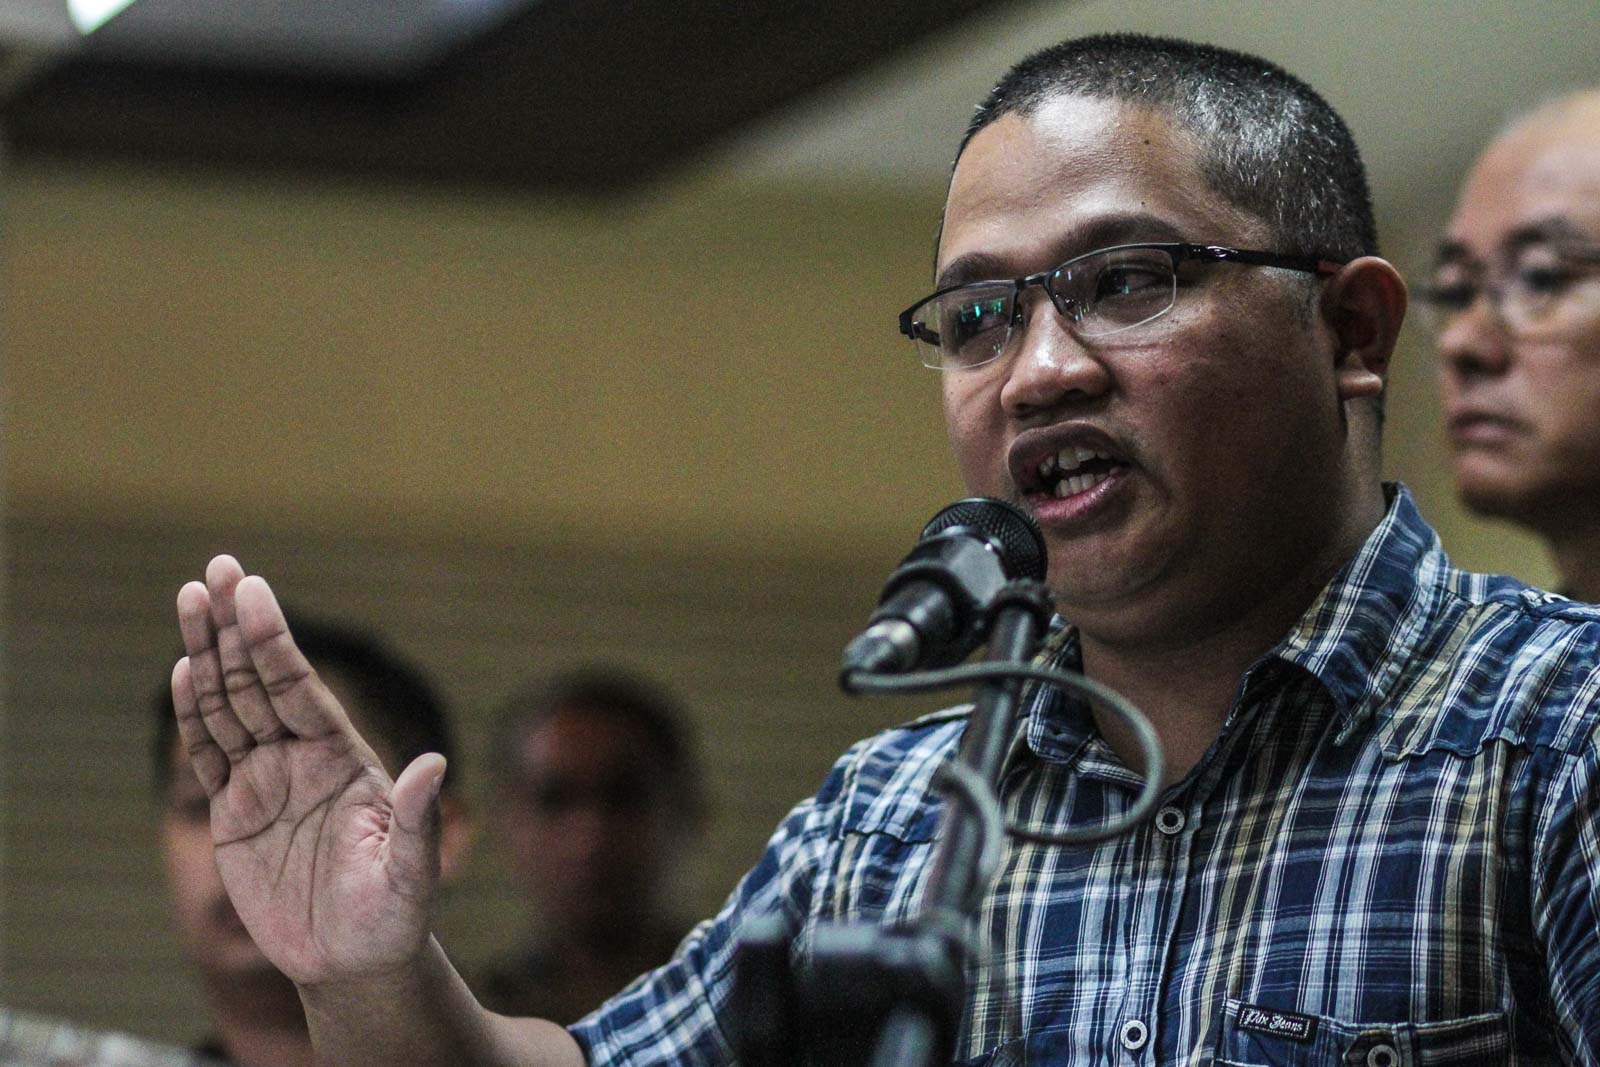 'BIKOY'. Peter Joemel Advincula alias Bikoy tells media in a news briefing in Camp Crame on May 23, 2019, that he surrendered to police as he feared for his safety. Photo by Lito Borras/Rappler   